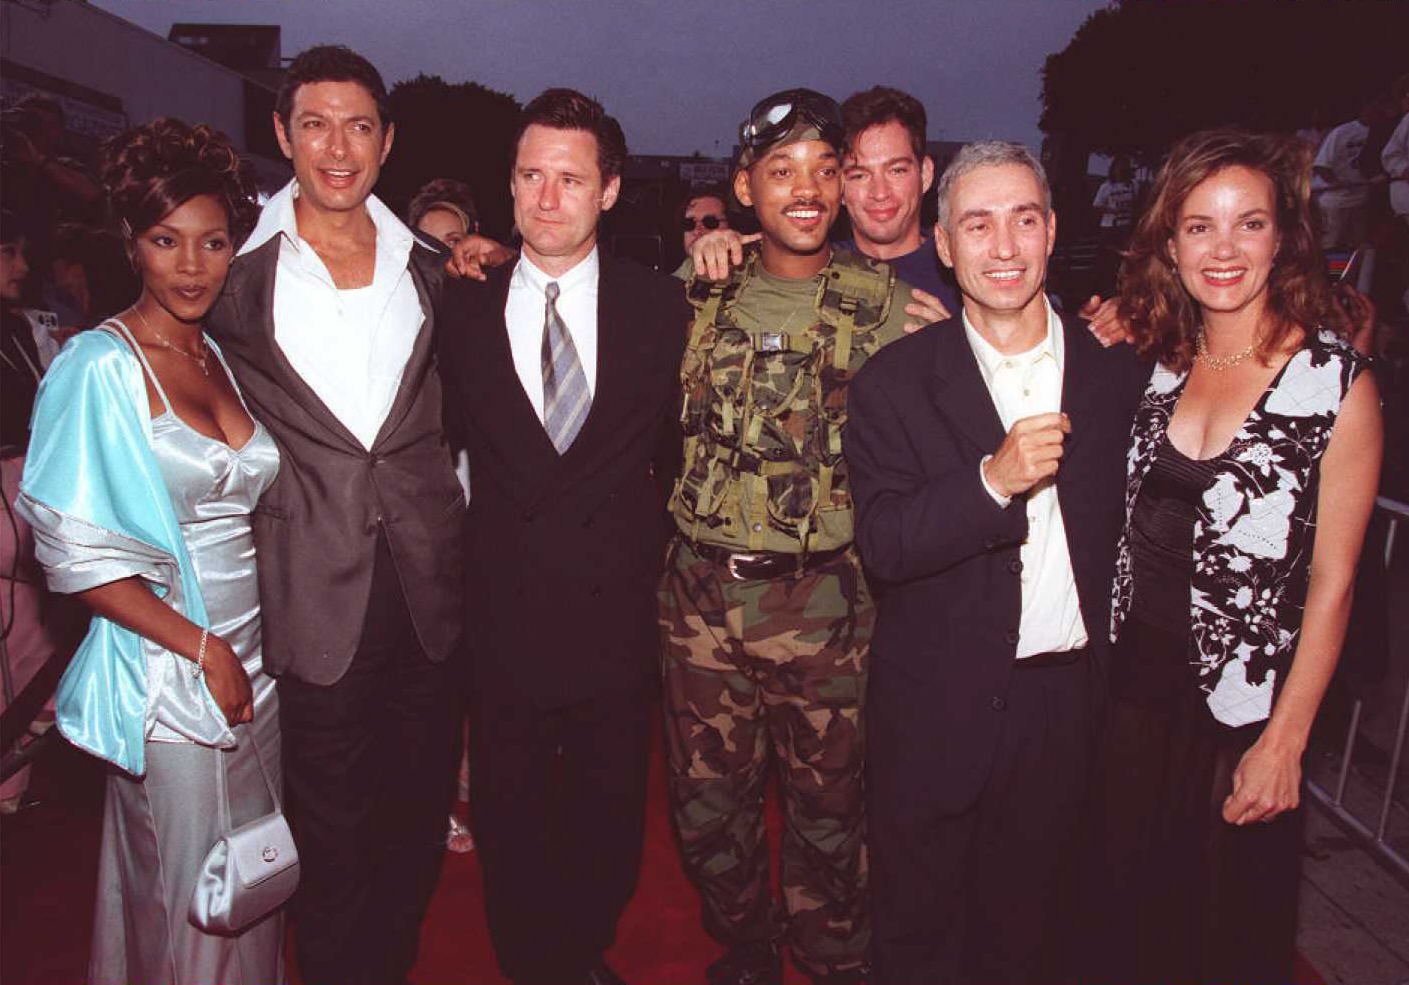 Vivica Fox, Jeff Goldblum, Bill Pullman, Will Smith, Harry Connick Jr., director Roland Emmerich, and Margaret Colin from the 'Independence Day' movie posing for a photograph